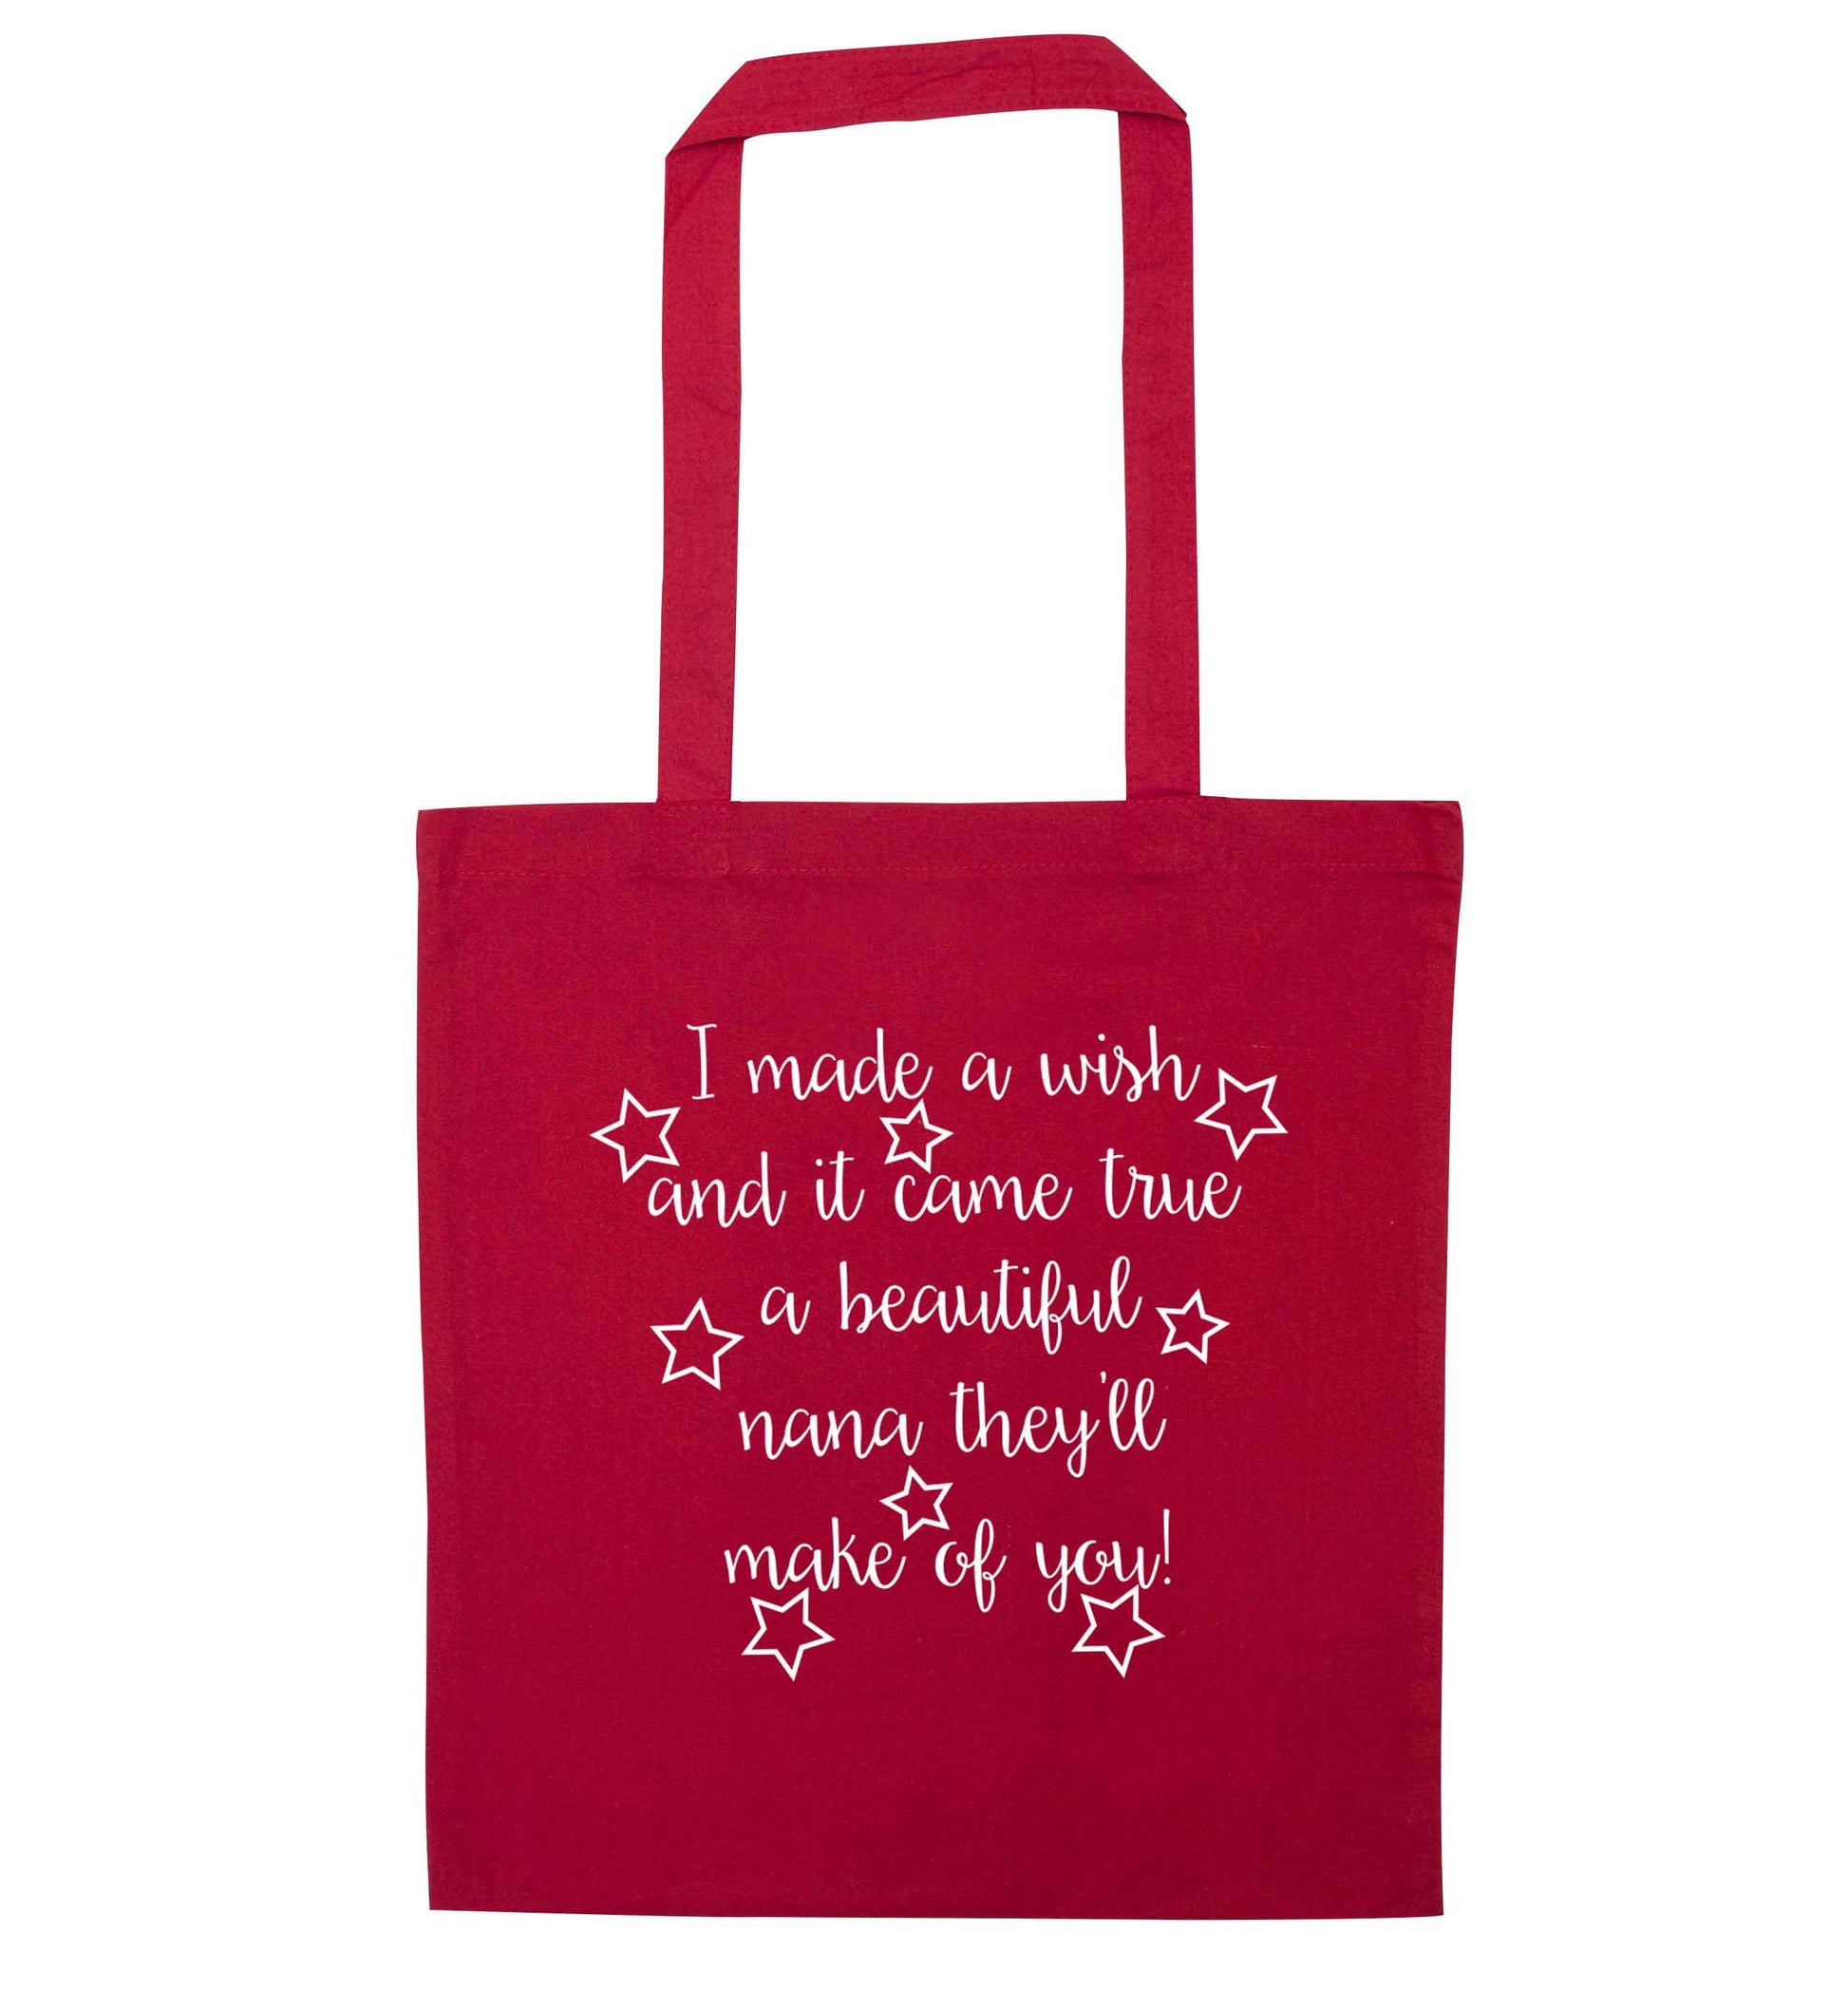 I made a wish and it came true a beautiful nana they'll make of you! red tote bag